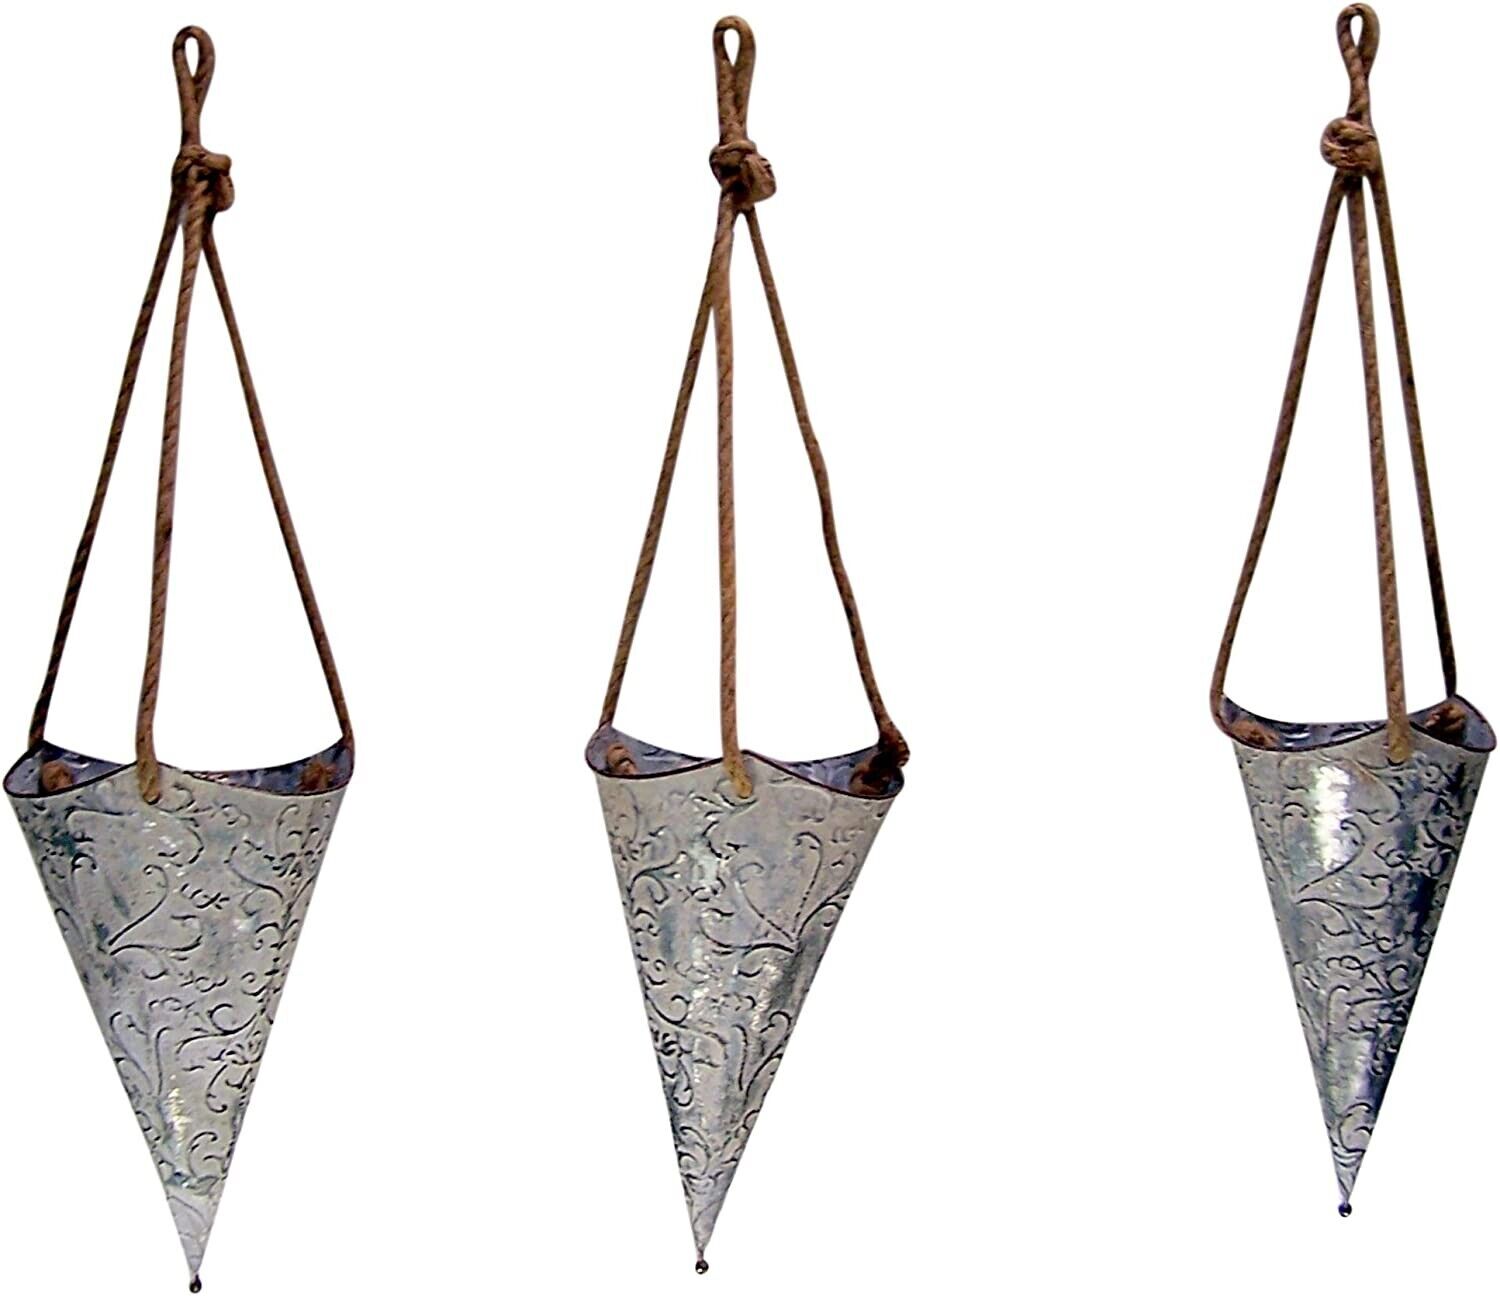 Distressed Patterned Metal Hanging Cone Planters with Brown Trim, Assorted Sizes